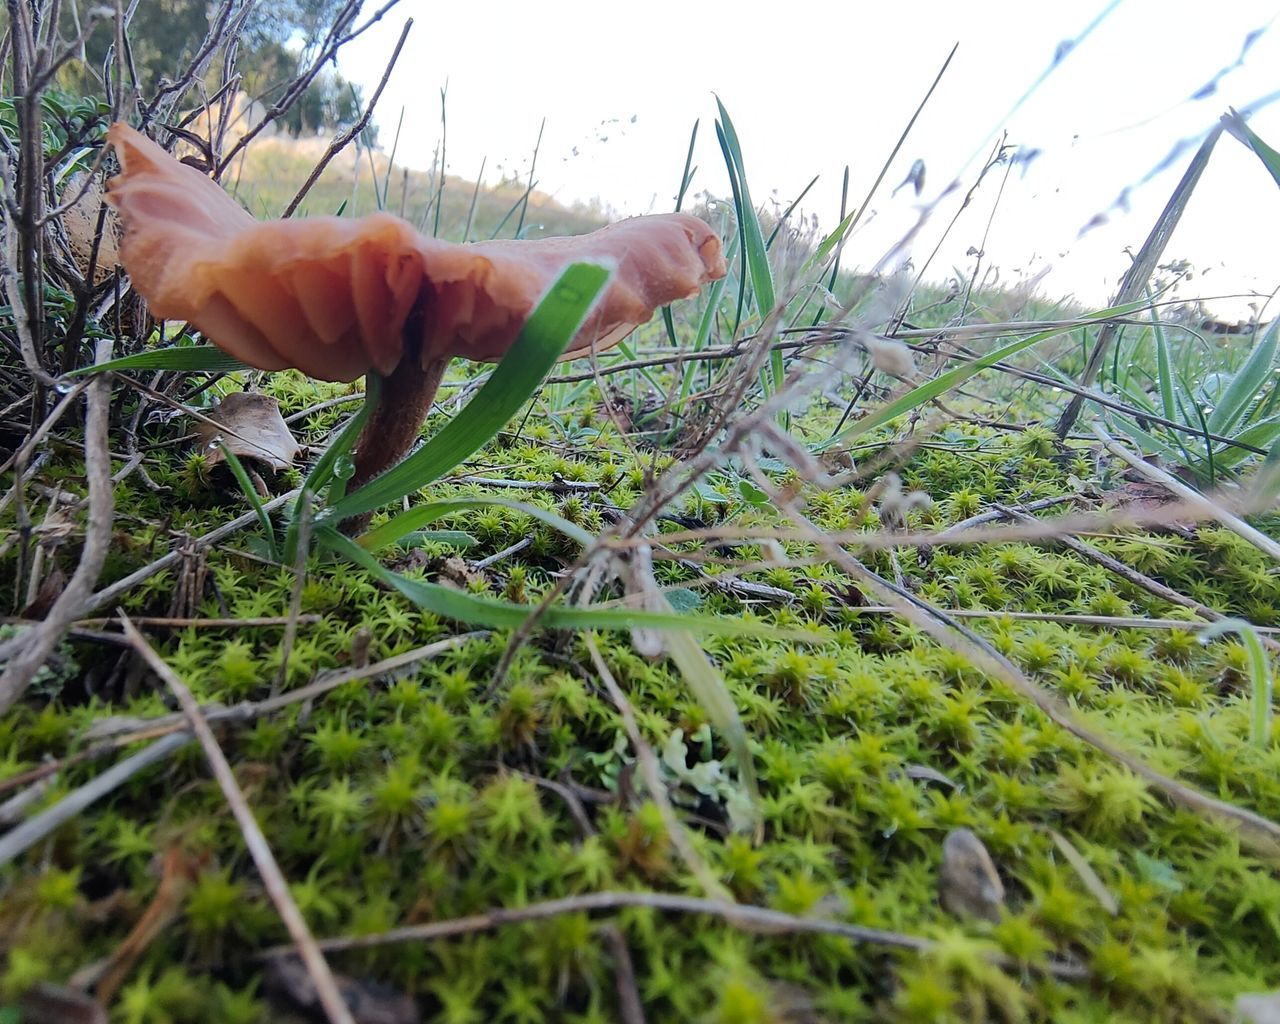 plant, grass, nature, hand, growth, flower, tree, one person, day, land, soil, field, sky, outdoors, green, selective focus, branch, food, close-up, lawn, finger, leaf, beauty in nature